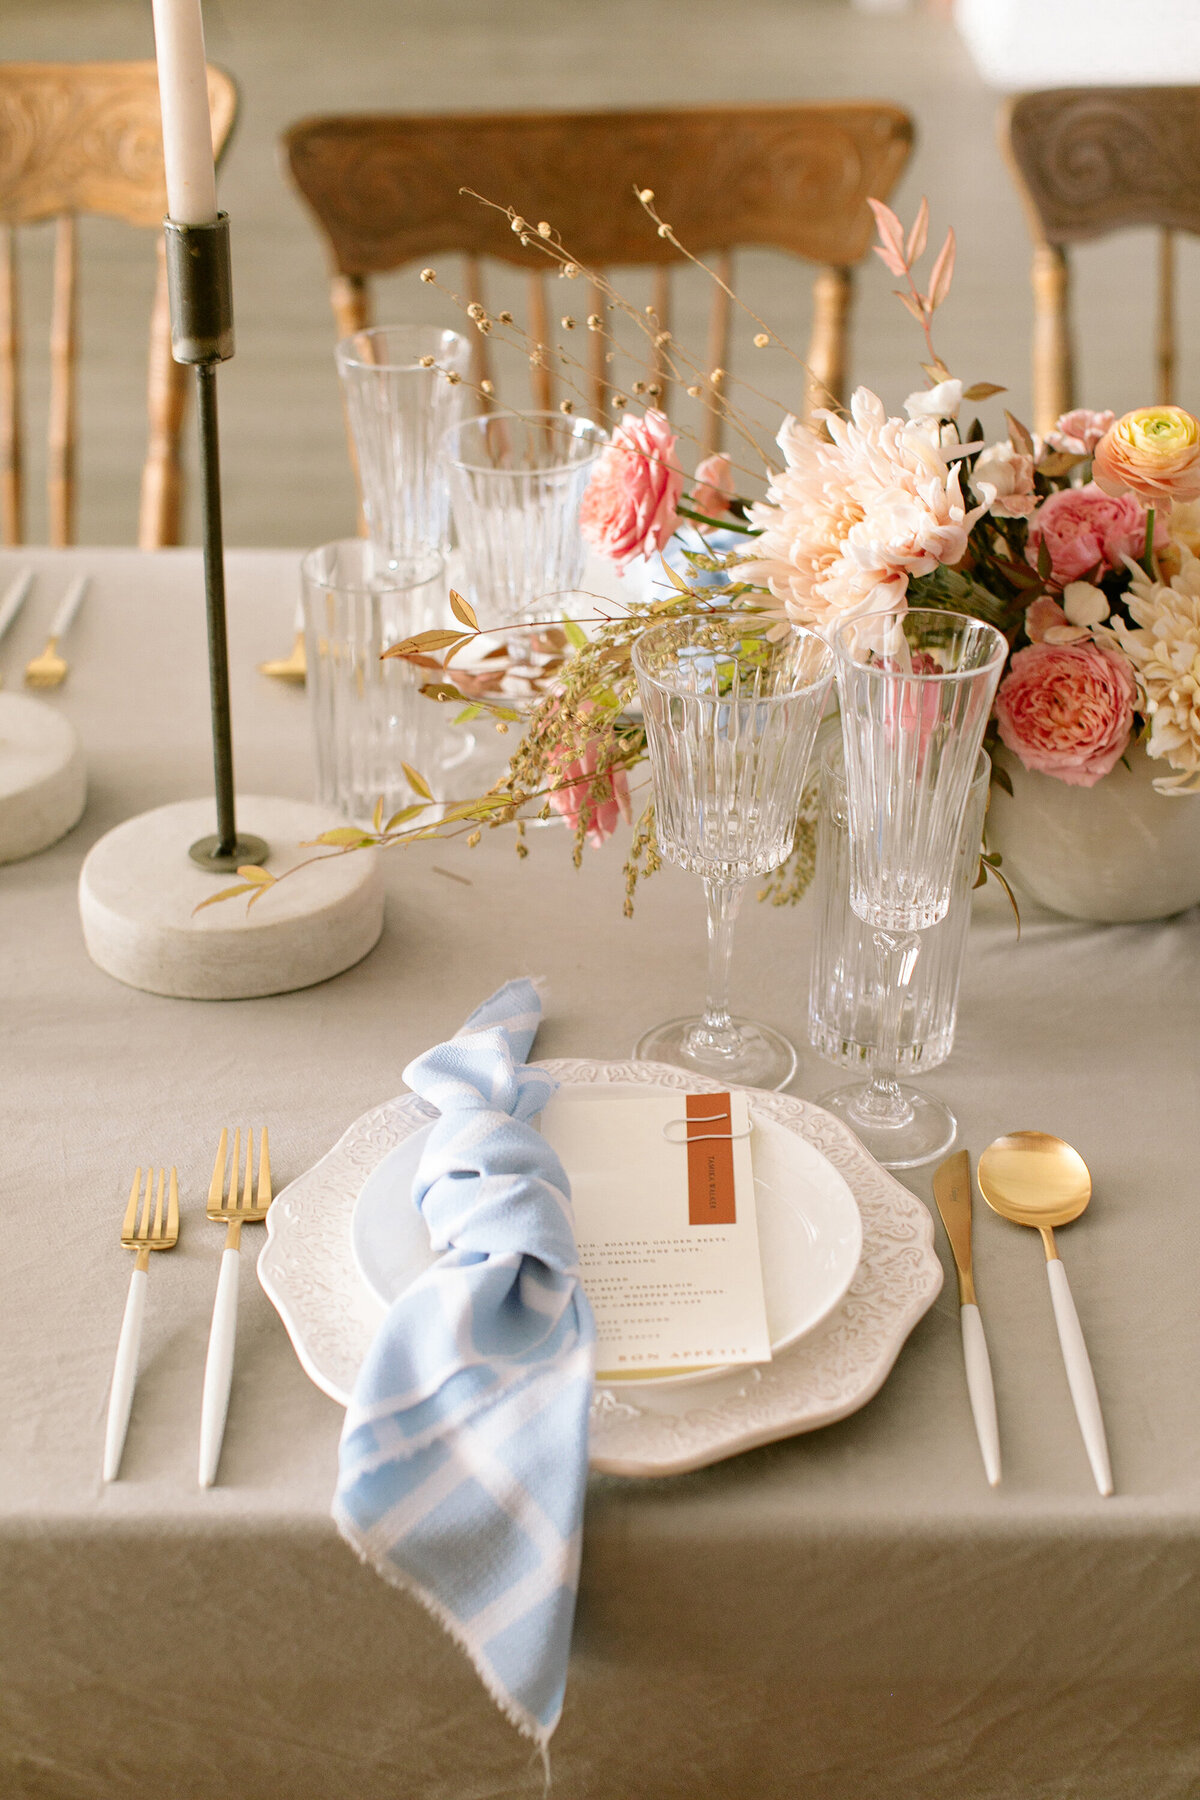 Contemporary wedding table with decor from Modern Rentals, contemporary decor rentals based in Calgary, AB. Featured on the Brontë Bride Vendor Guide.